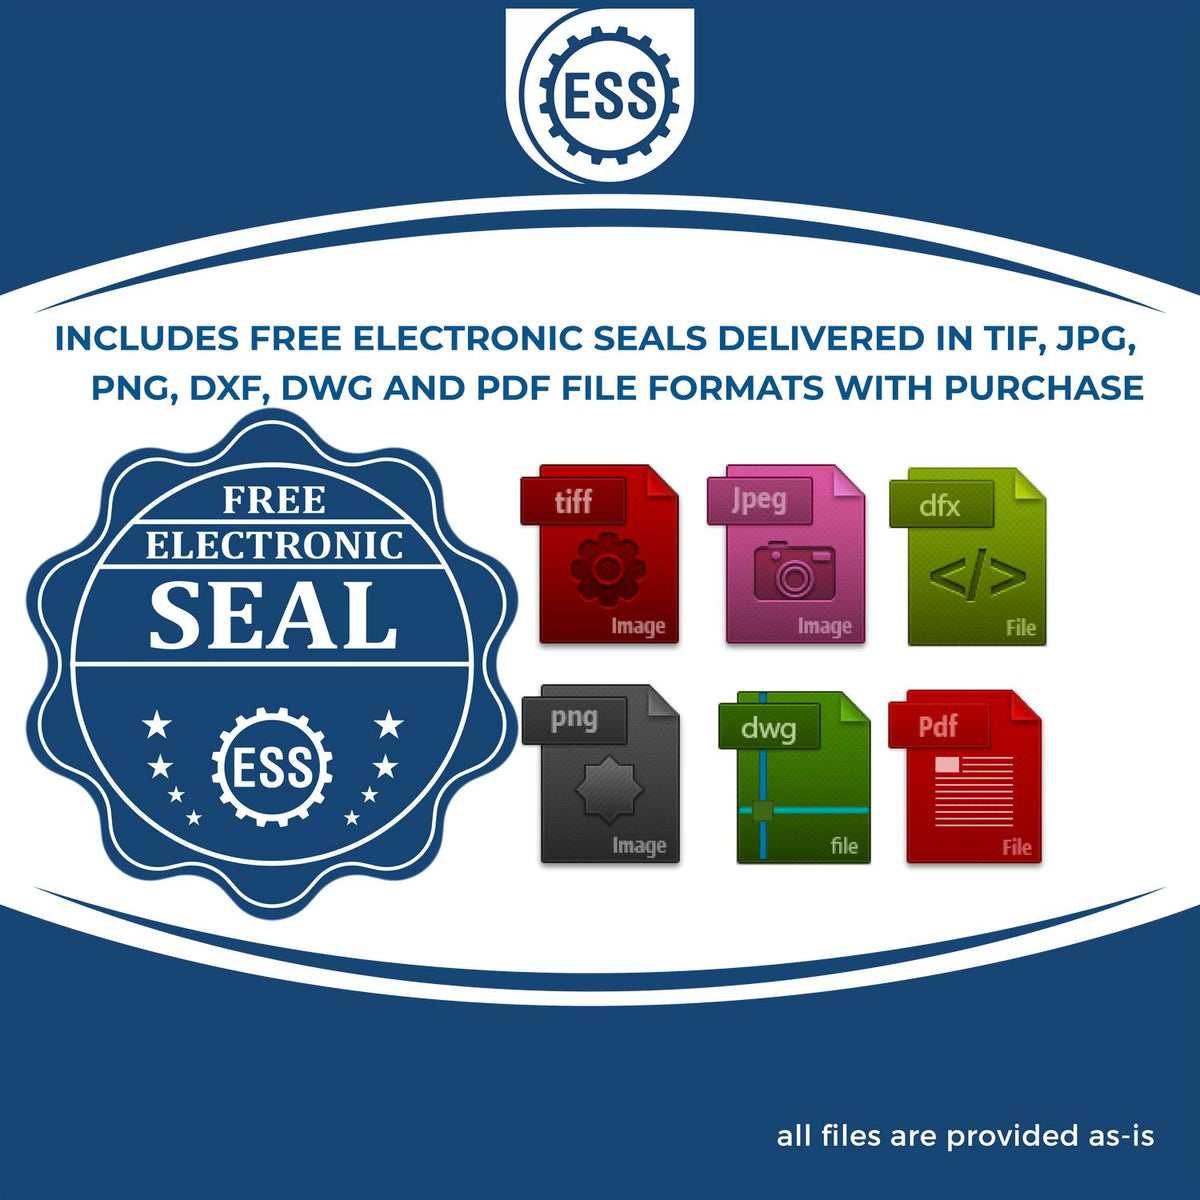 An infographic for the free electronic seal for the MaxLight Premium Pre-Inked New Mexico State Seal Notarial Stamp illustrating the different file type icons such as DXF, DWG, TIF, JPG and PNG.